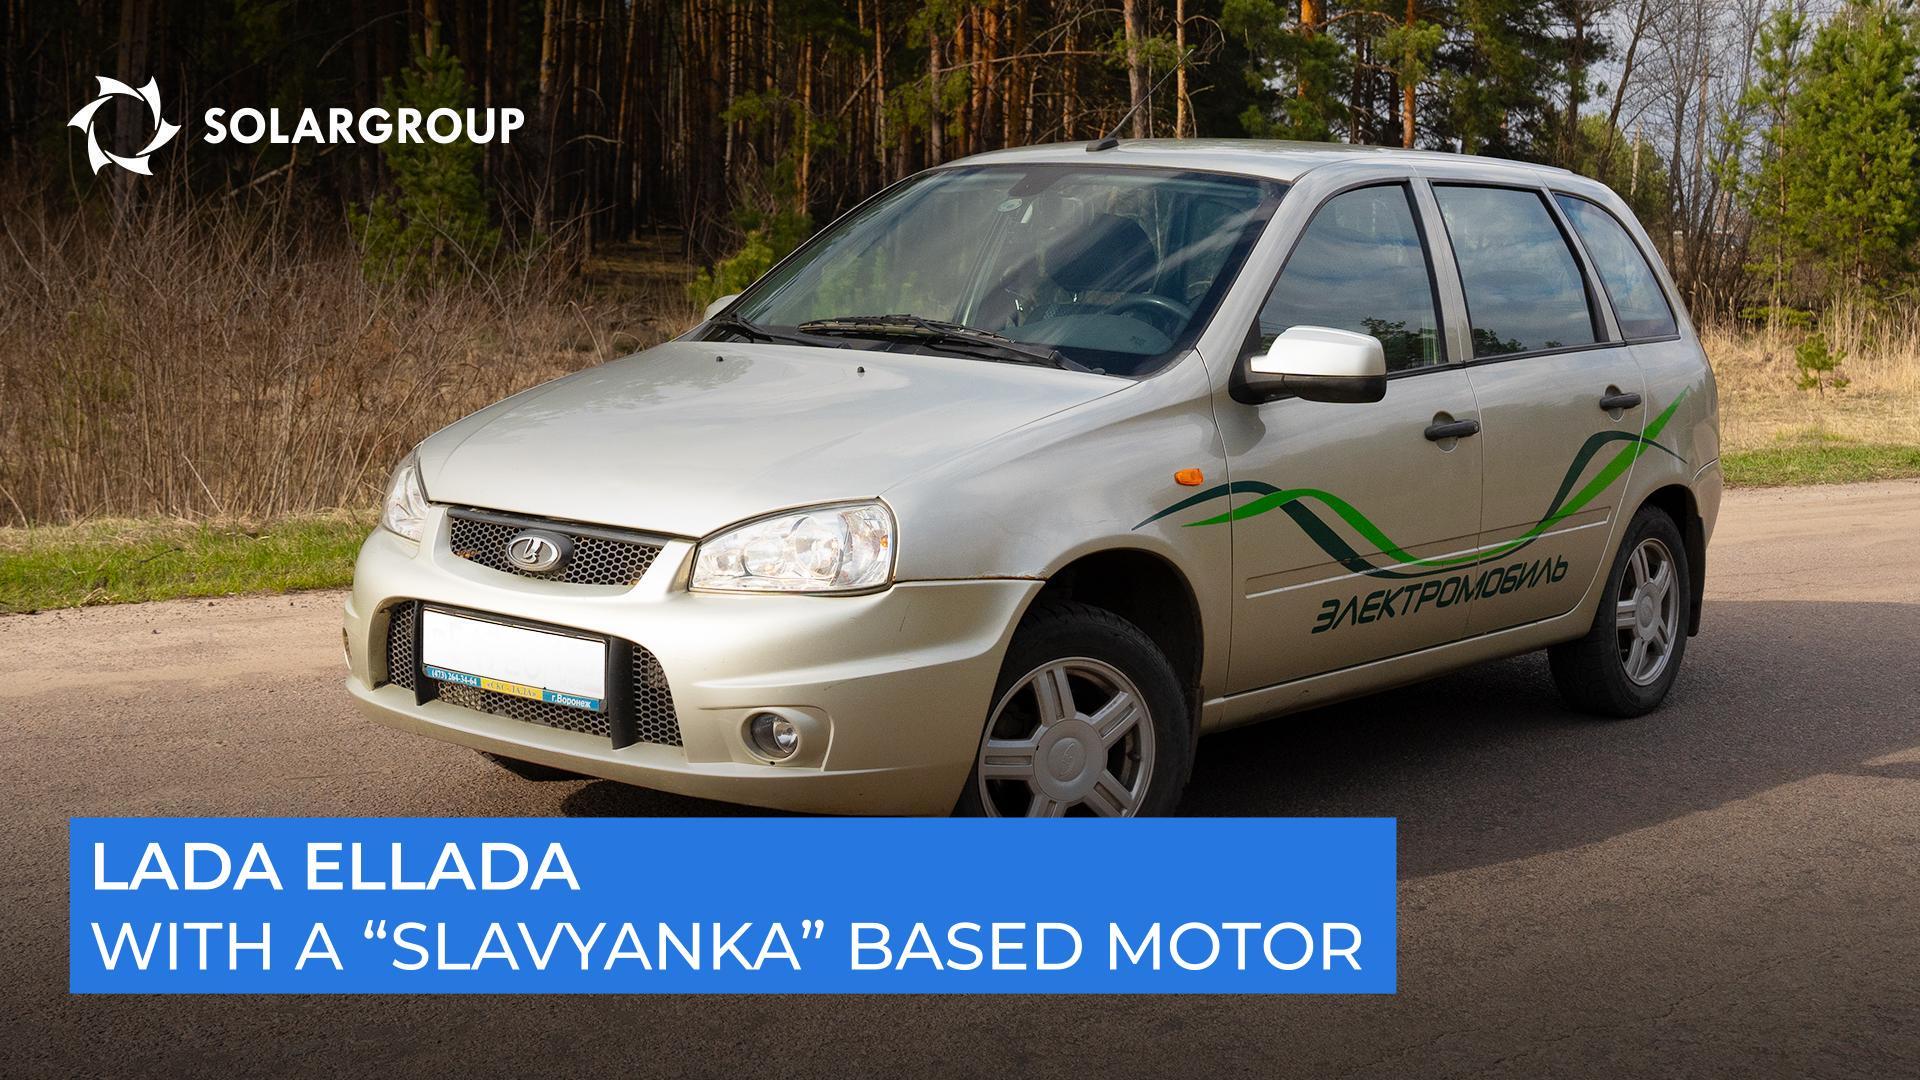 Fast, quiet and enduring: what did the running tests of the "Slavyanka" based electric car demonstrate?